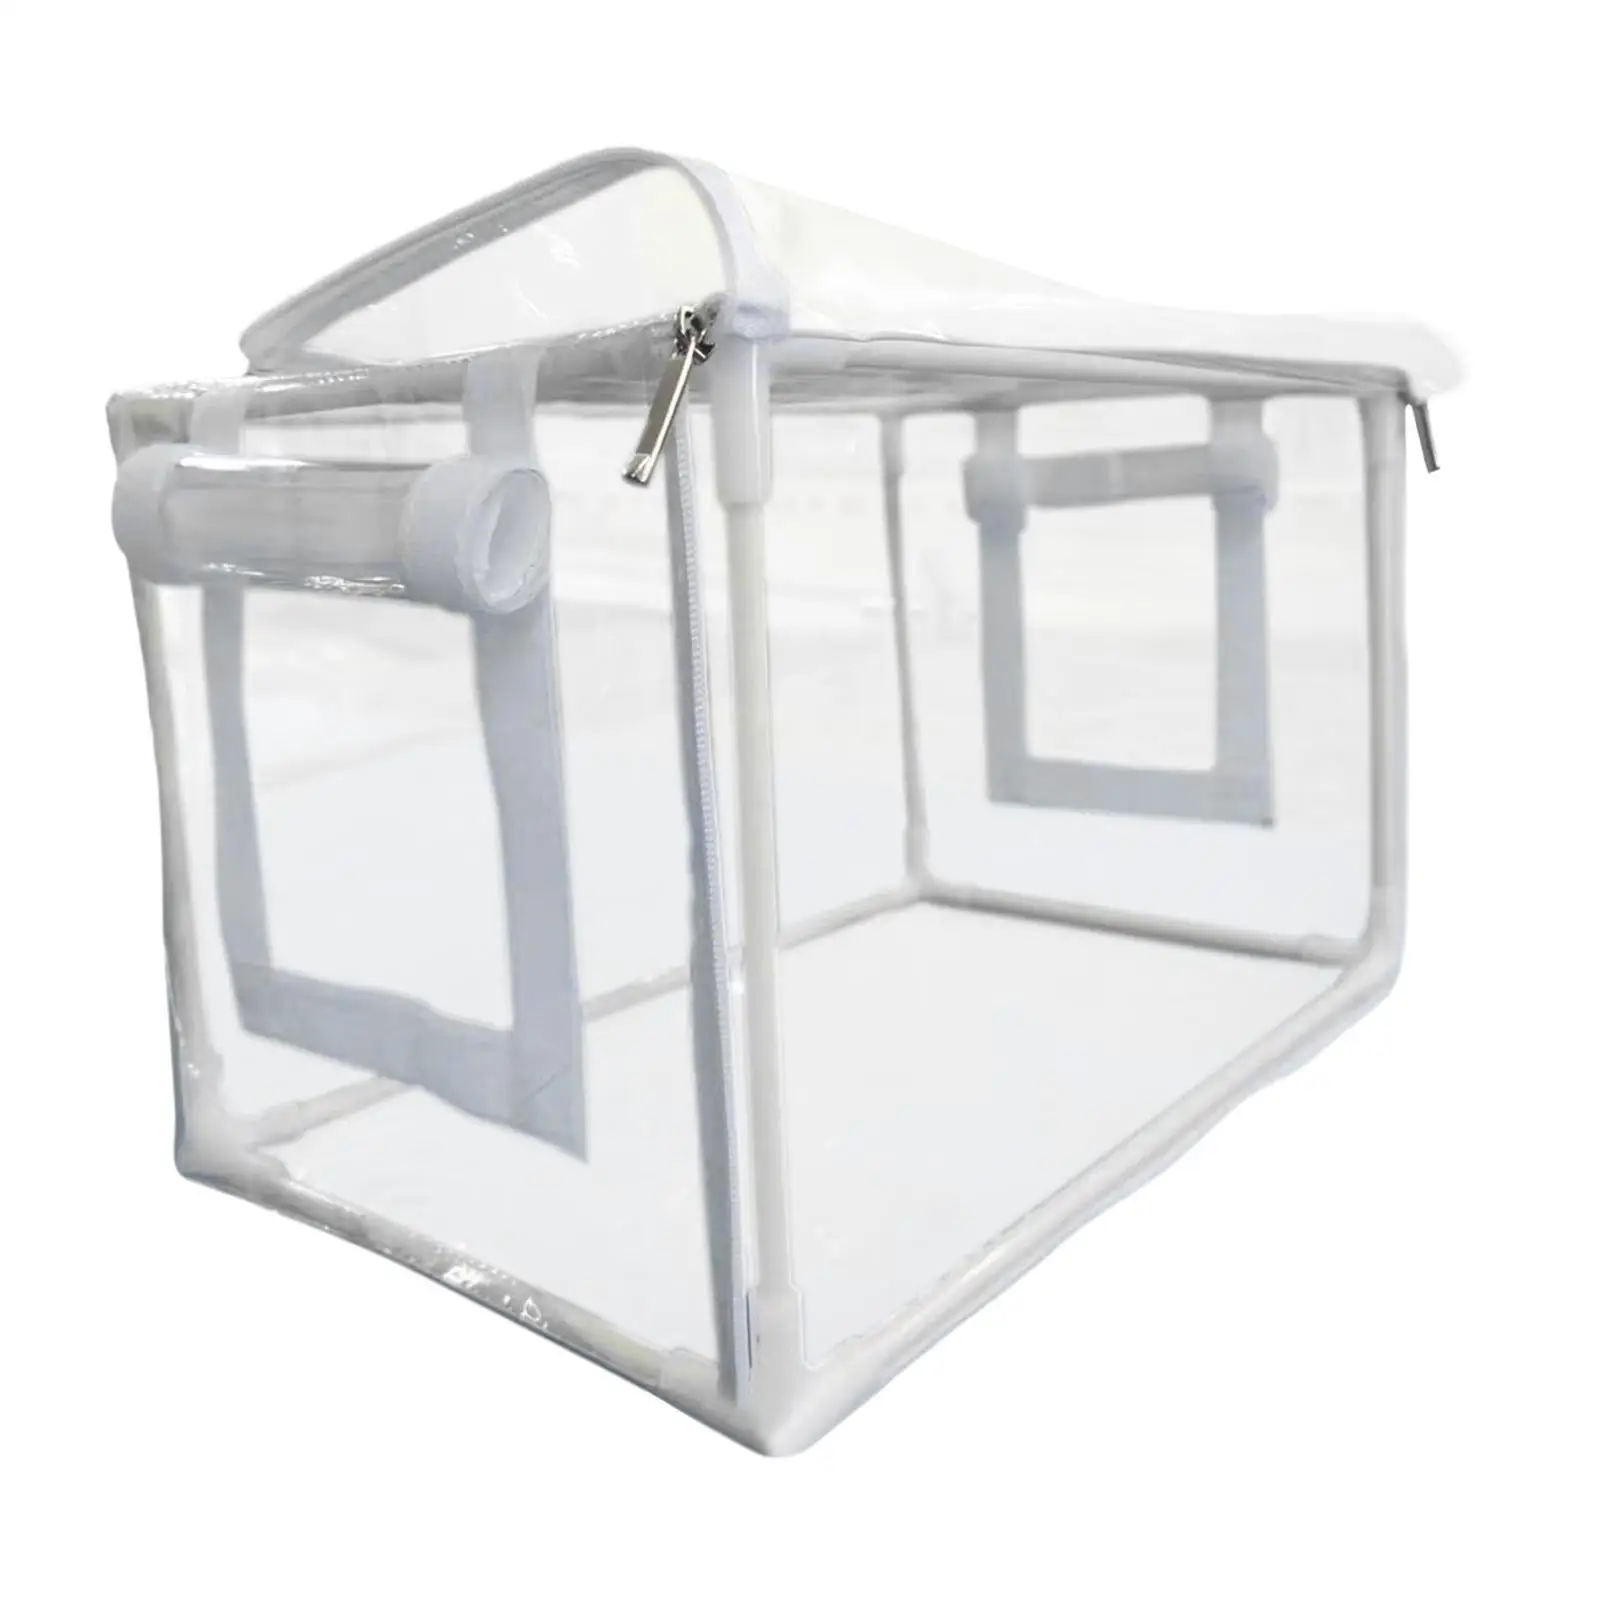 Still Air Box PVC with Sturdy Frame for Cold Frost Protector Yard Waterproof Planters Box Greenhouse Reusable Garden Greenhouse